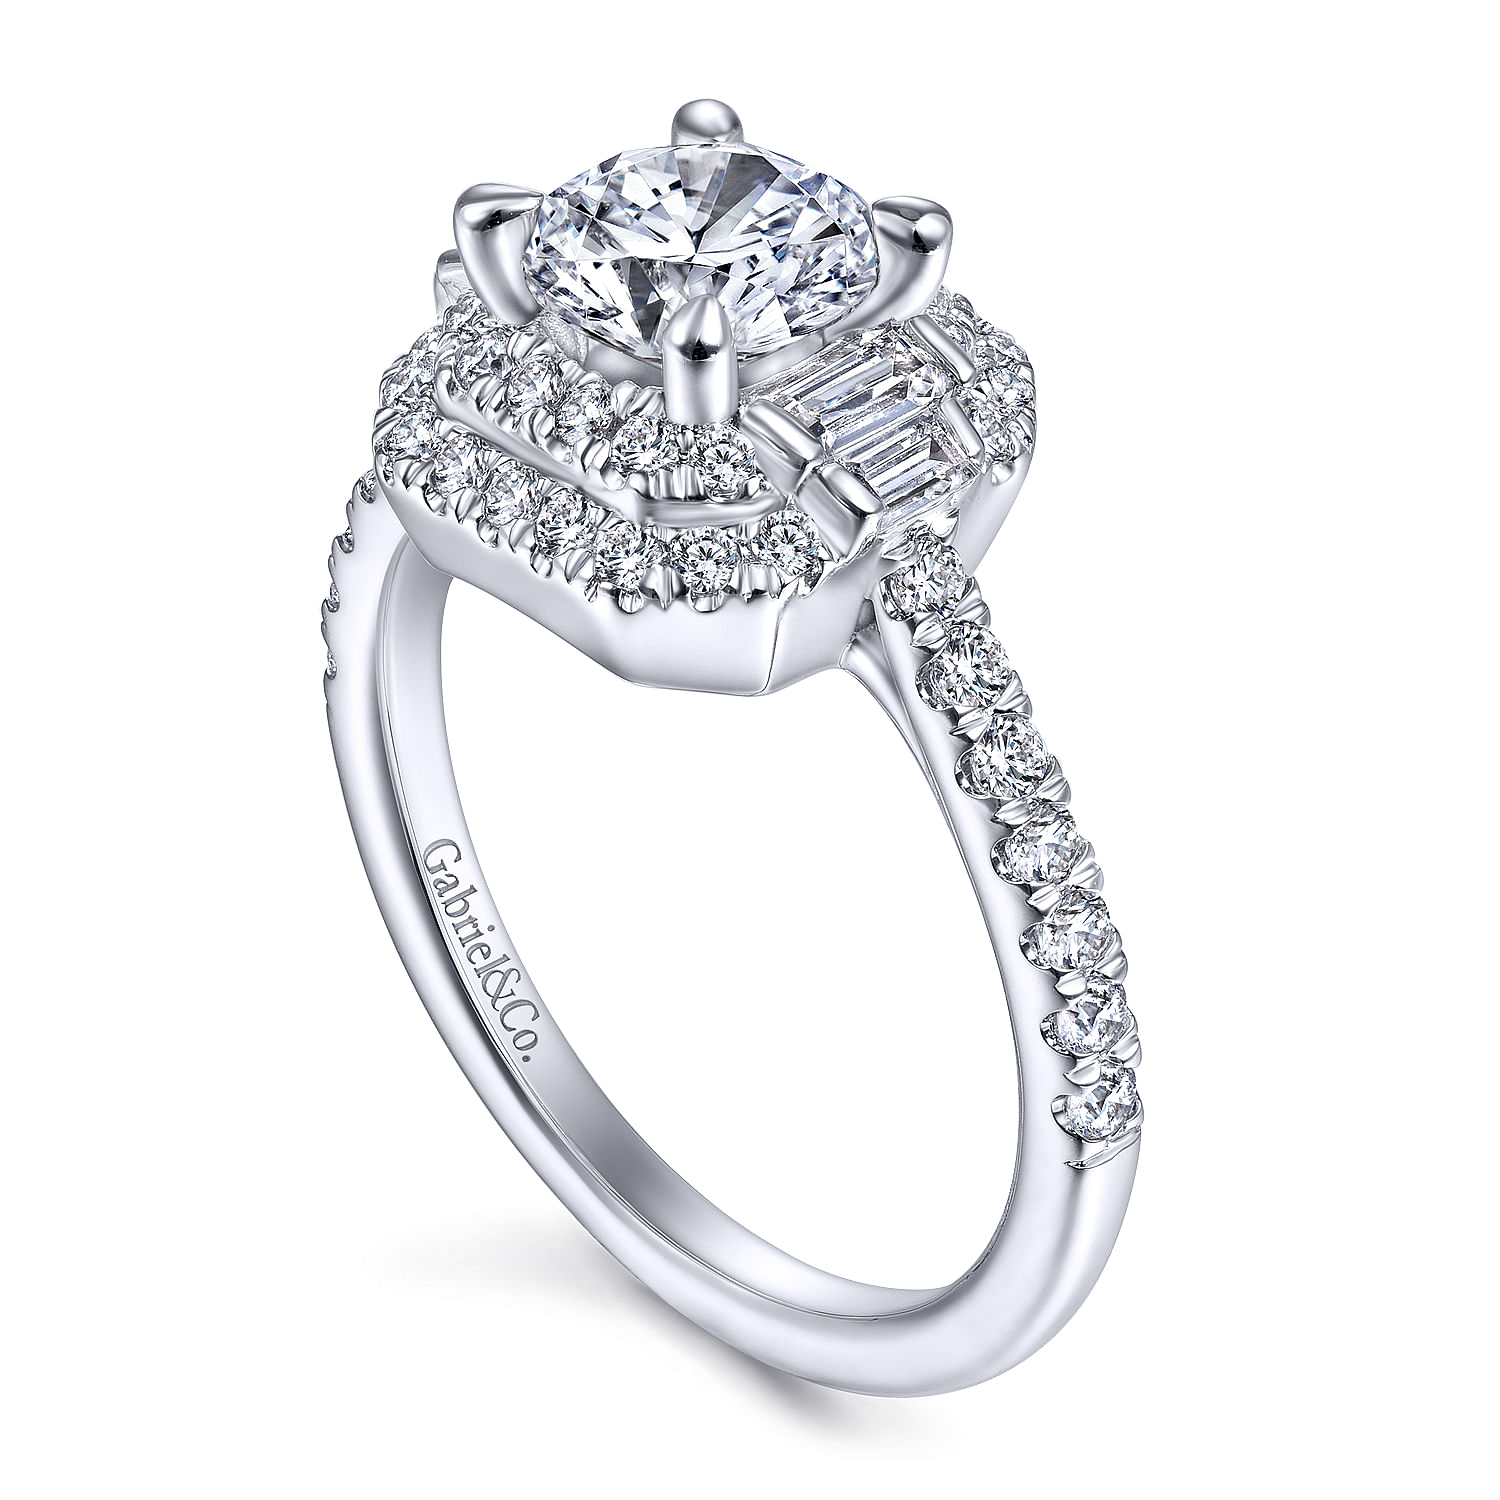 Vintage Inspired 14k White Gold Cushion Double Halo Round Diamond Channel Set Engagement Ring